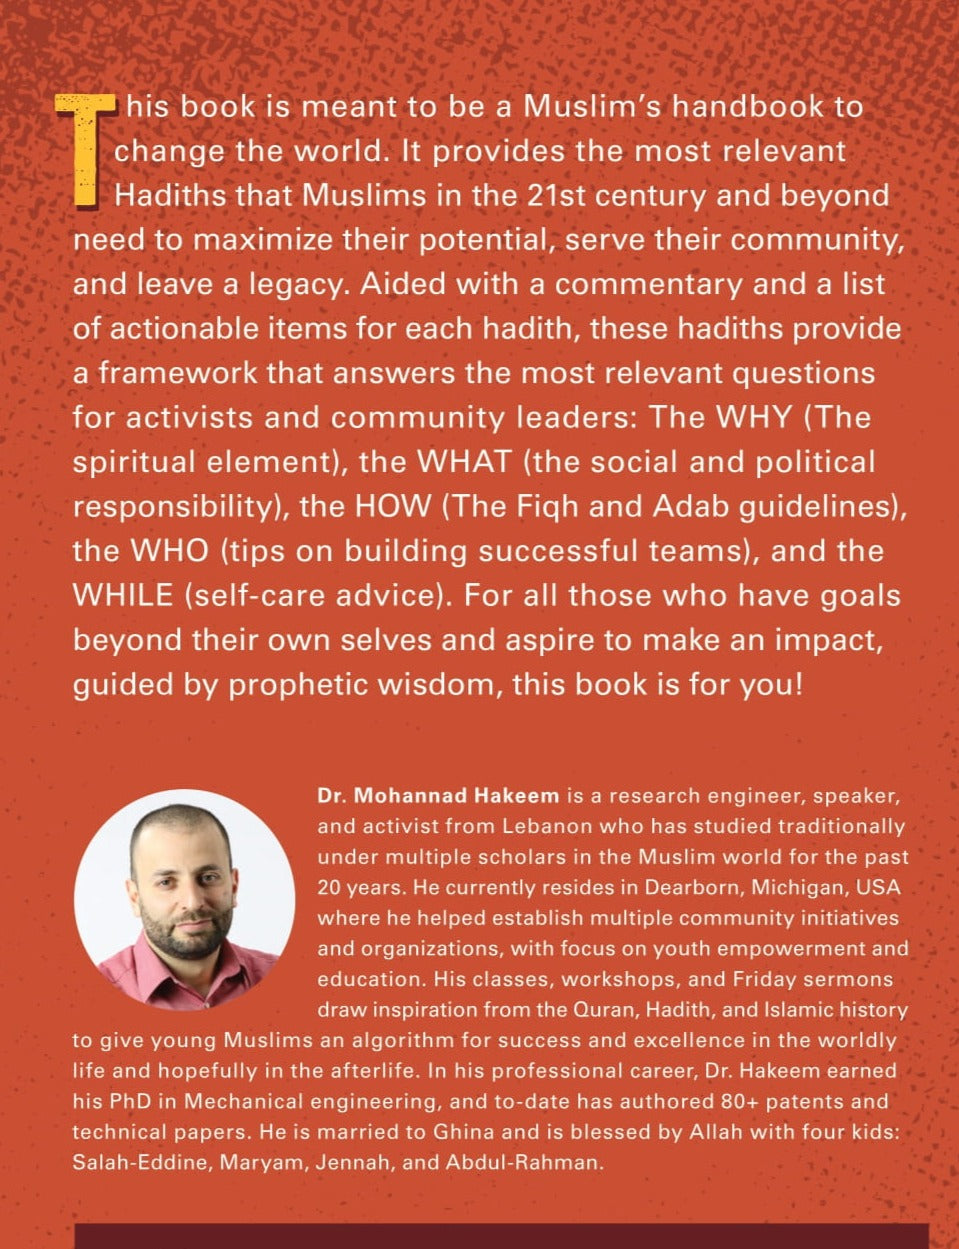 40 Hadith on Community Service and Activism